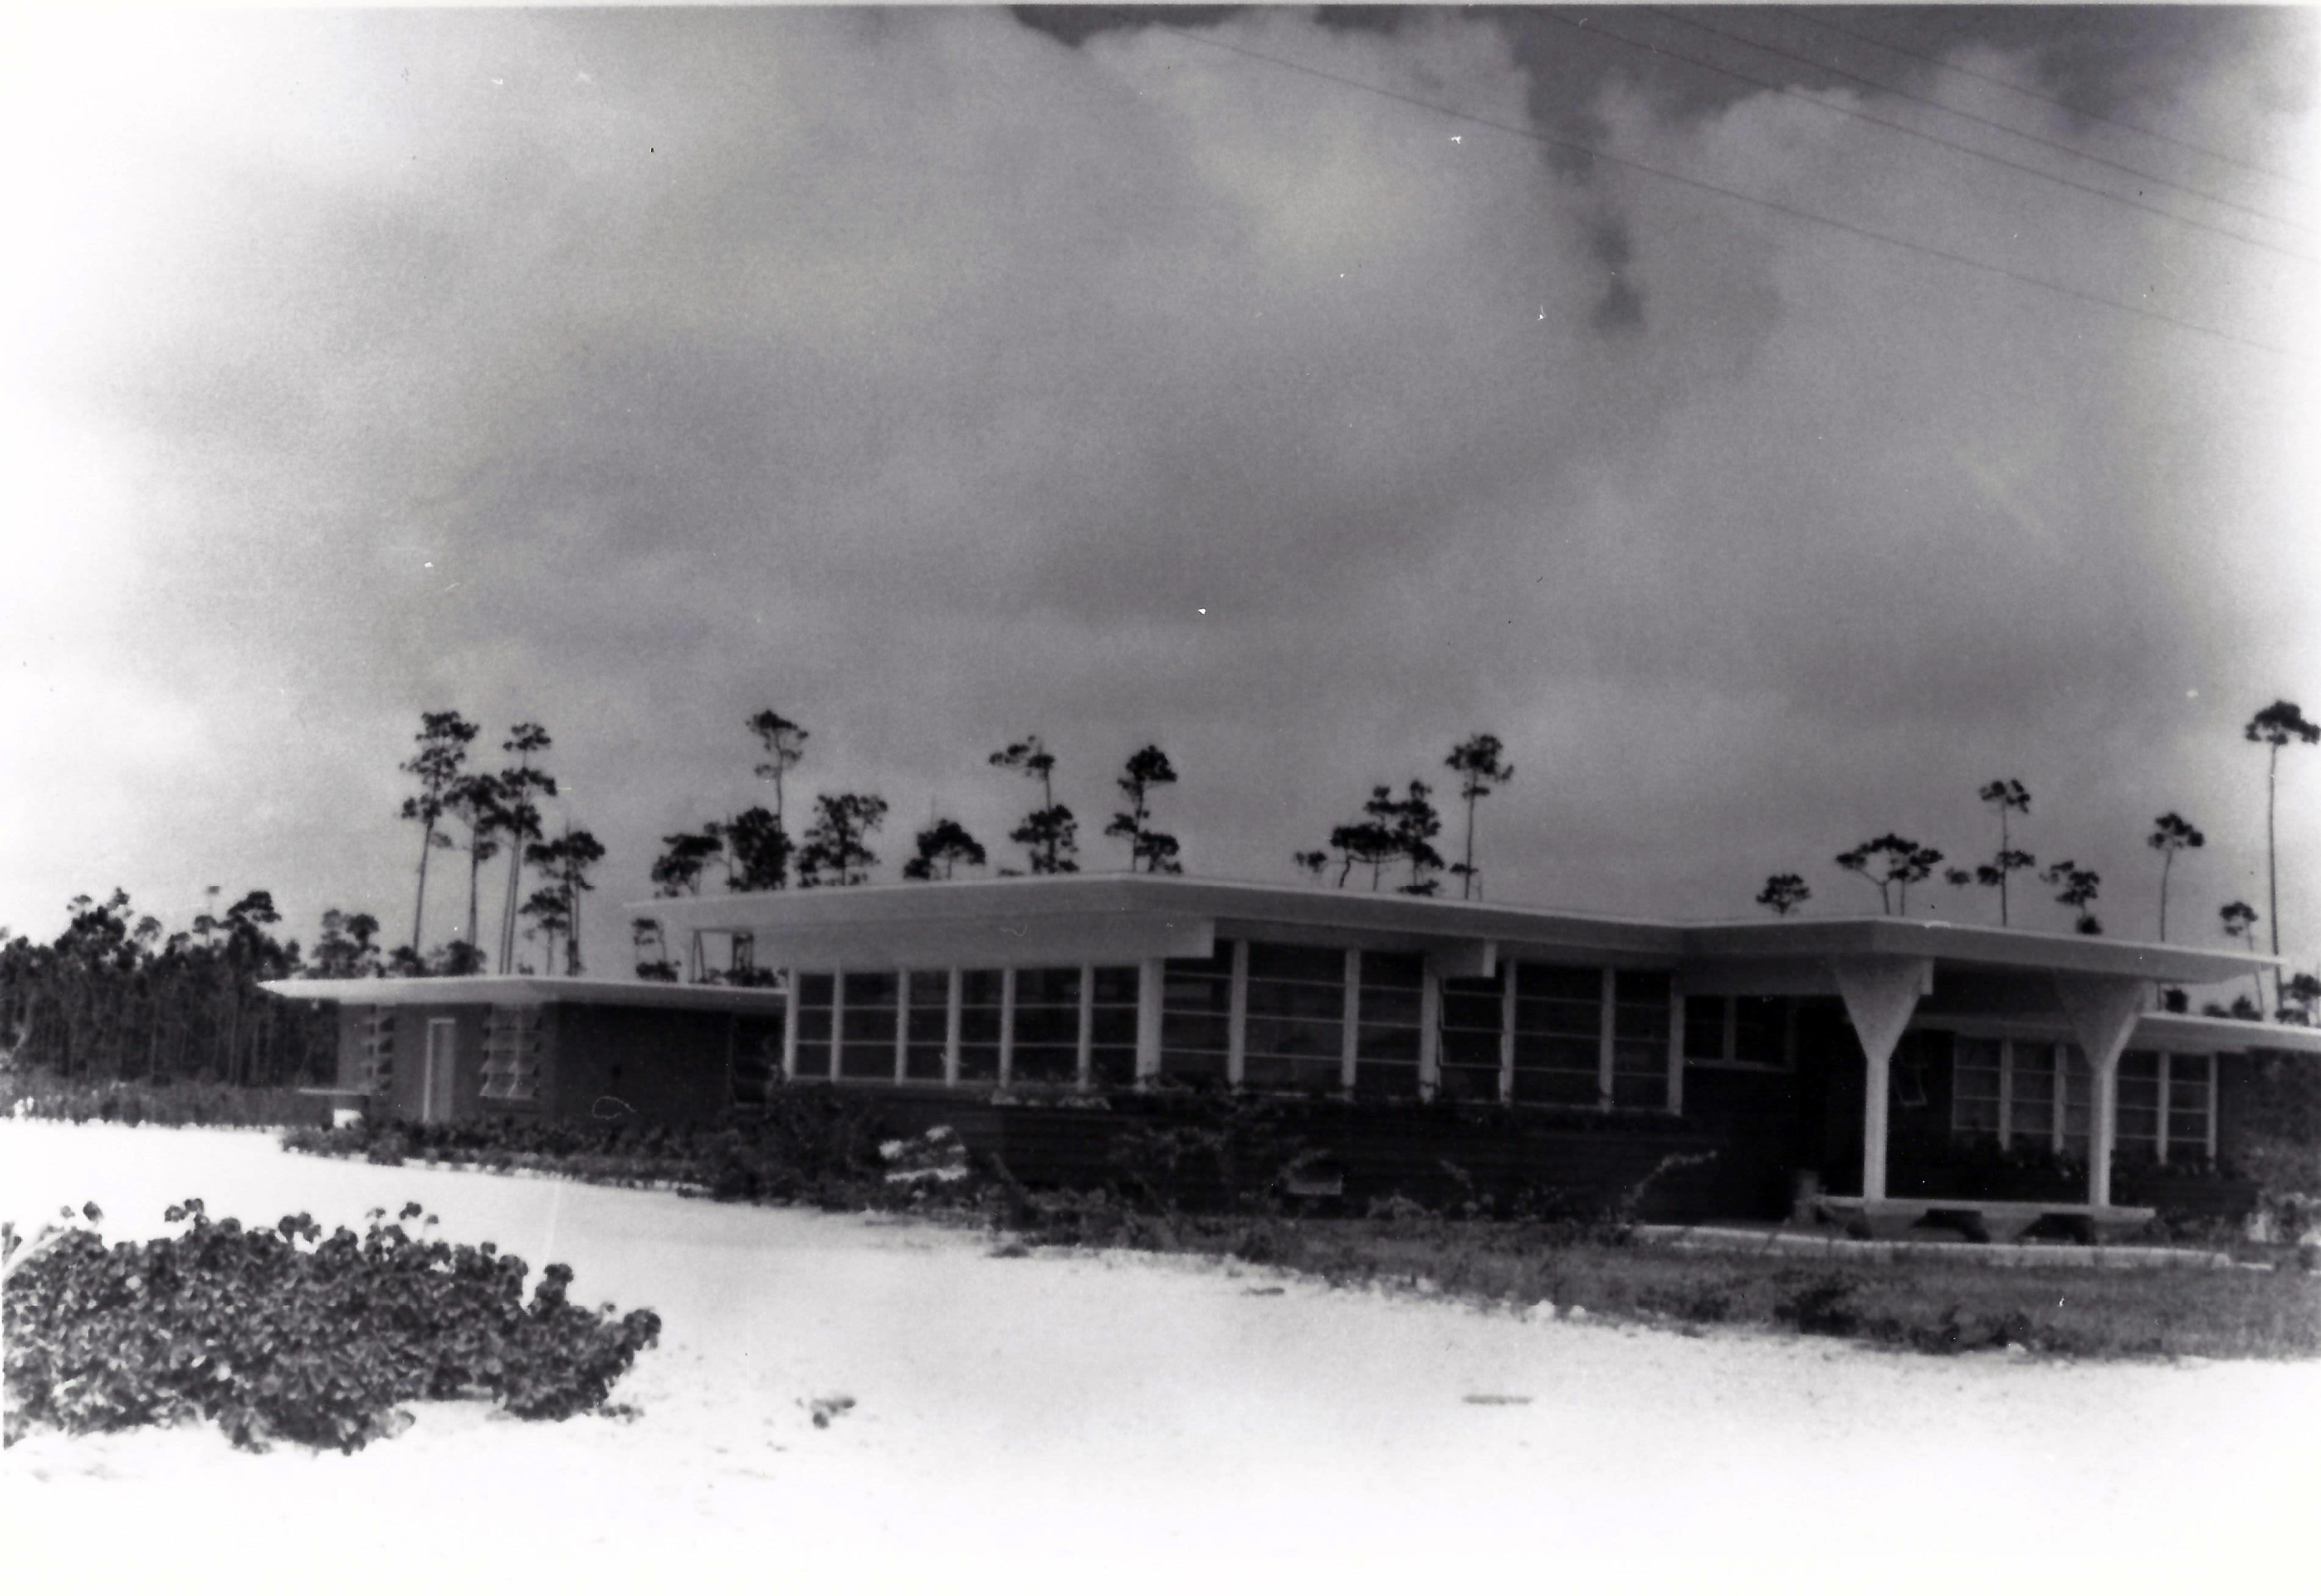 Offices of the Grand Bahama Port Authority, 1950's